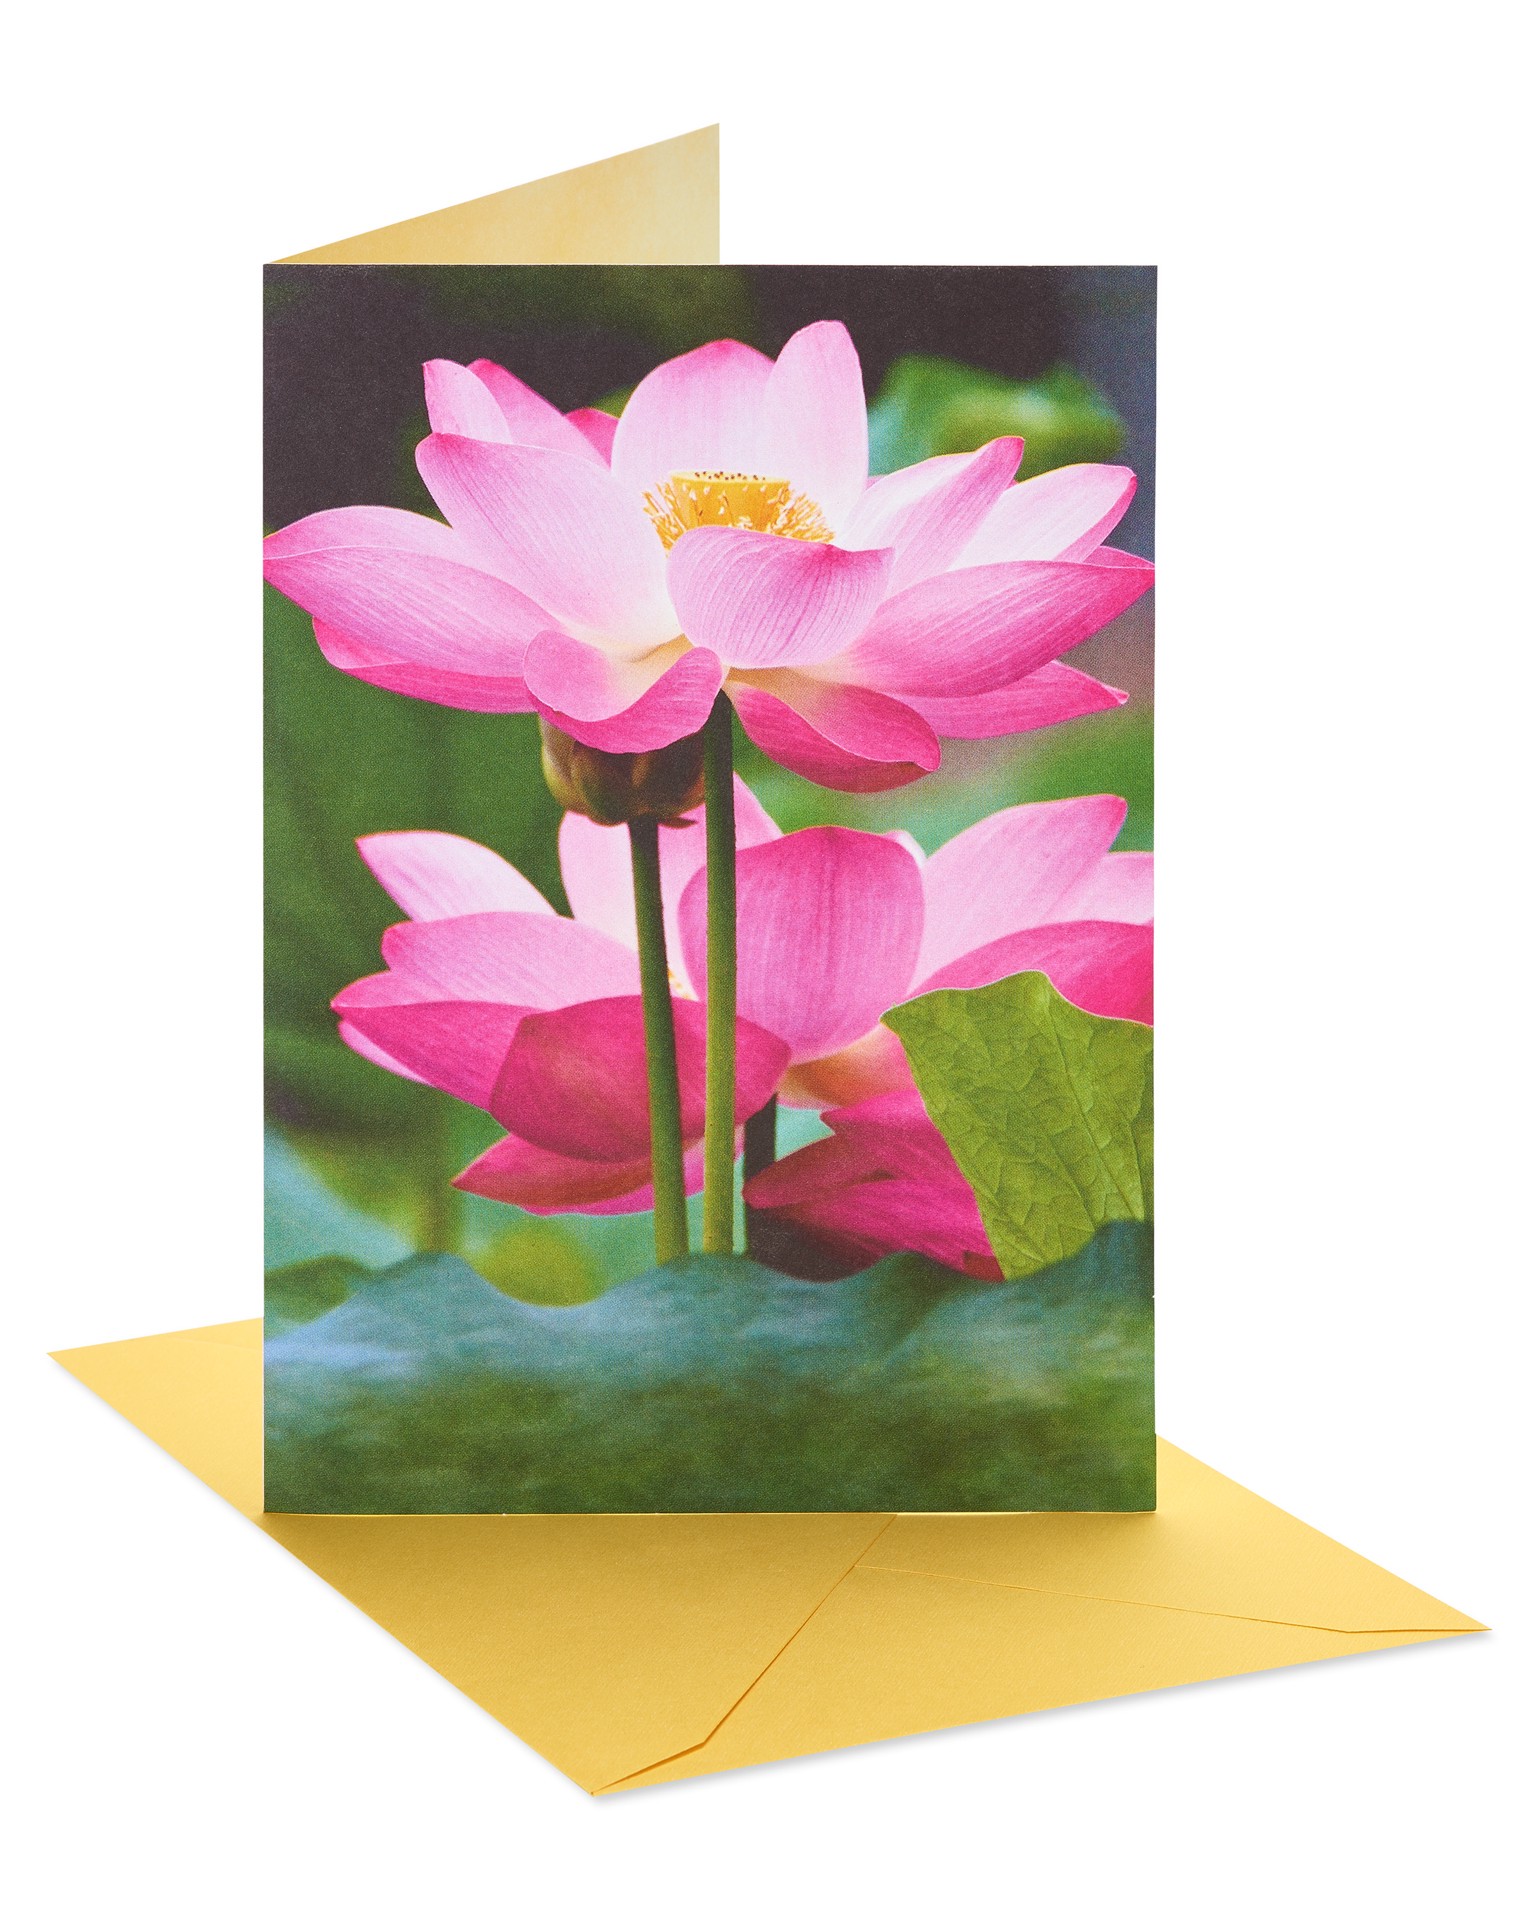 slide 5 of 5, American Greetings cards are a great way to connect with the people you care about. This gorgeous embellished photography design of a pink blossom with shining embellishments is a lovely way to add beauty to their day. Let them know you're thinking of them. Features 6 cards and 6 envelopes., 6 ct